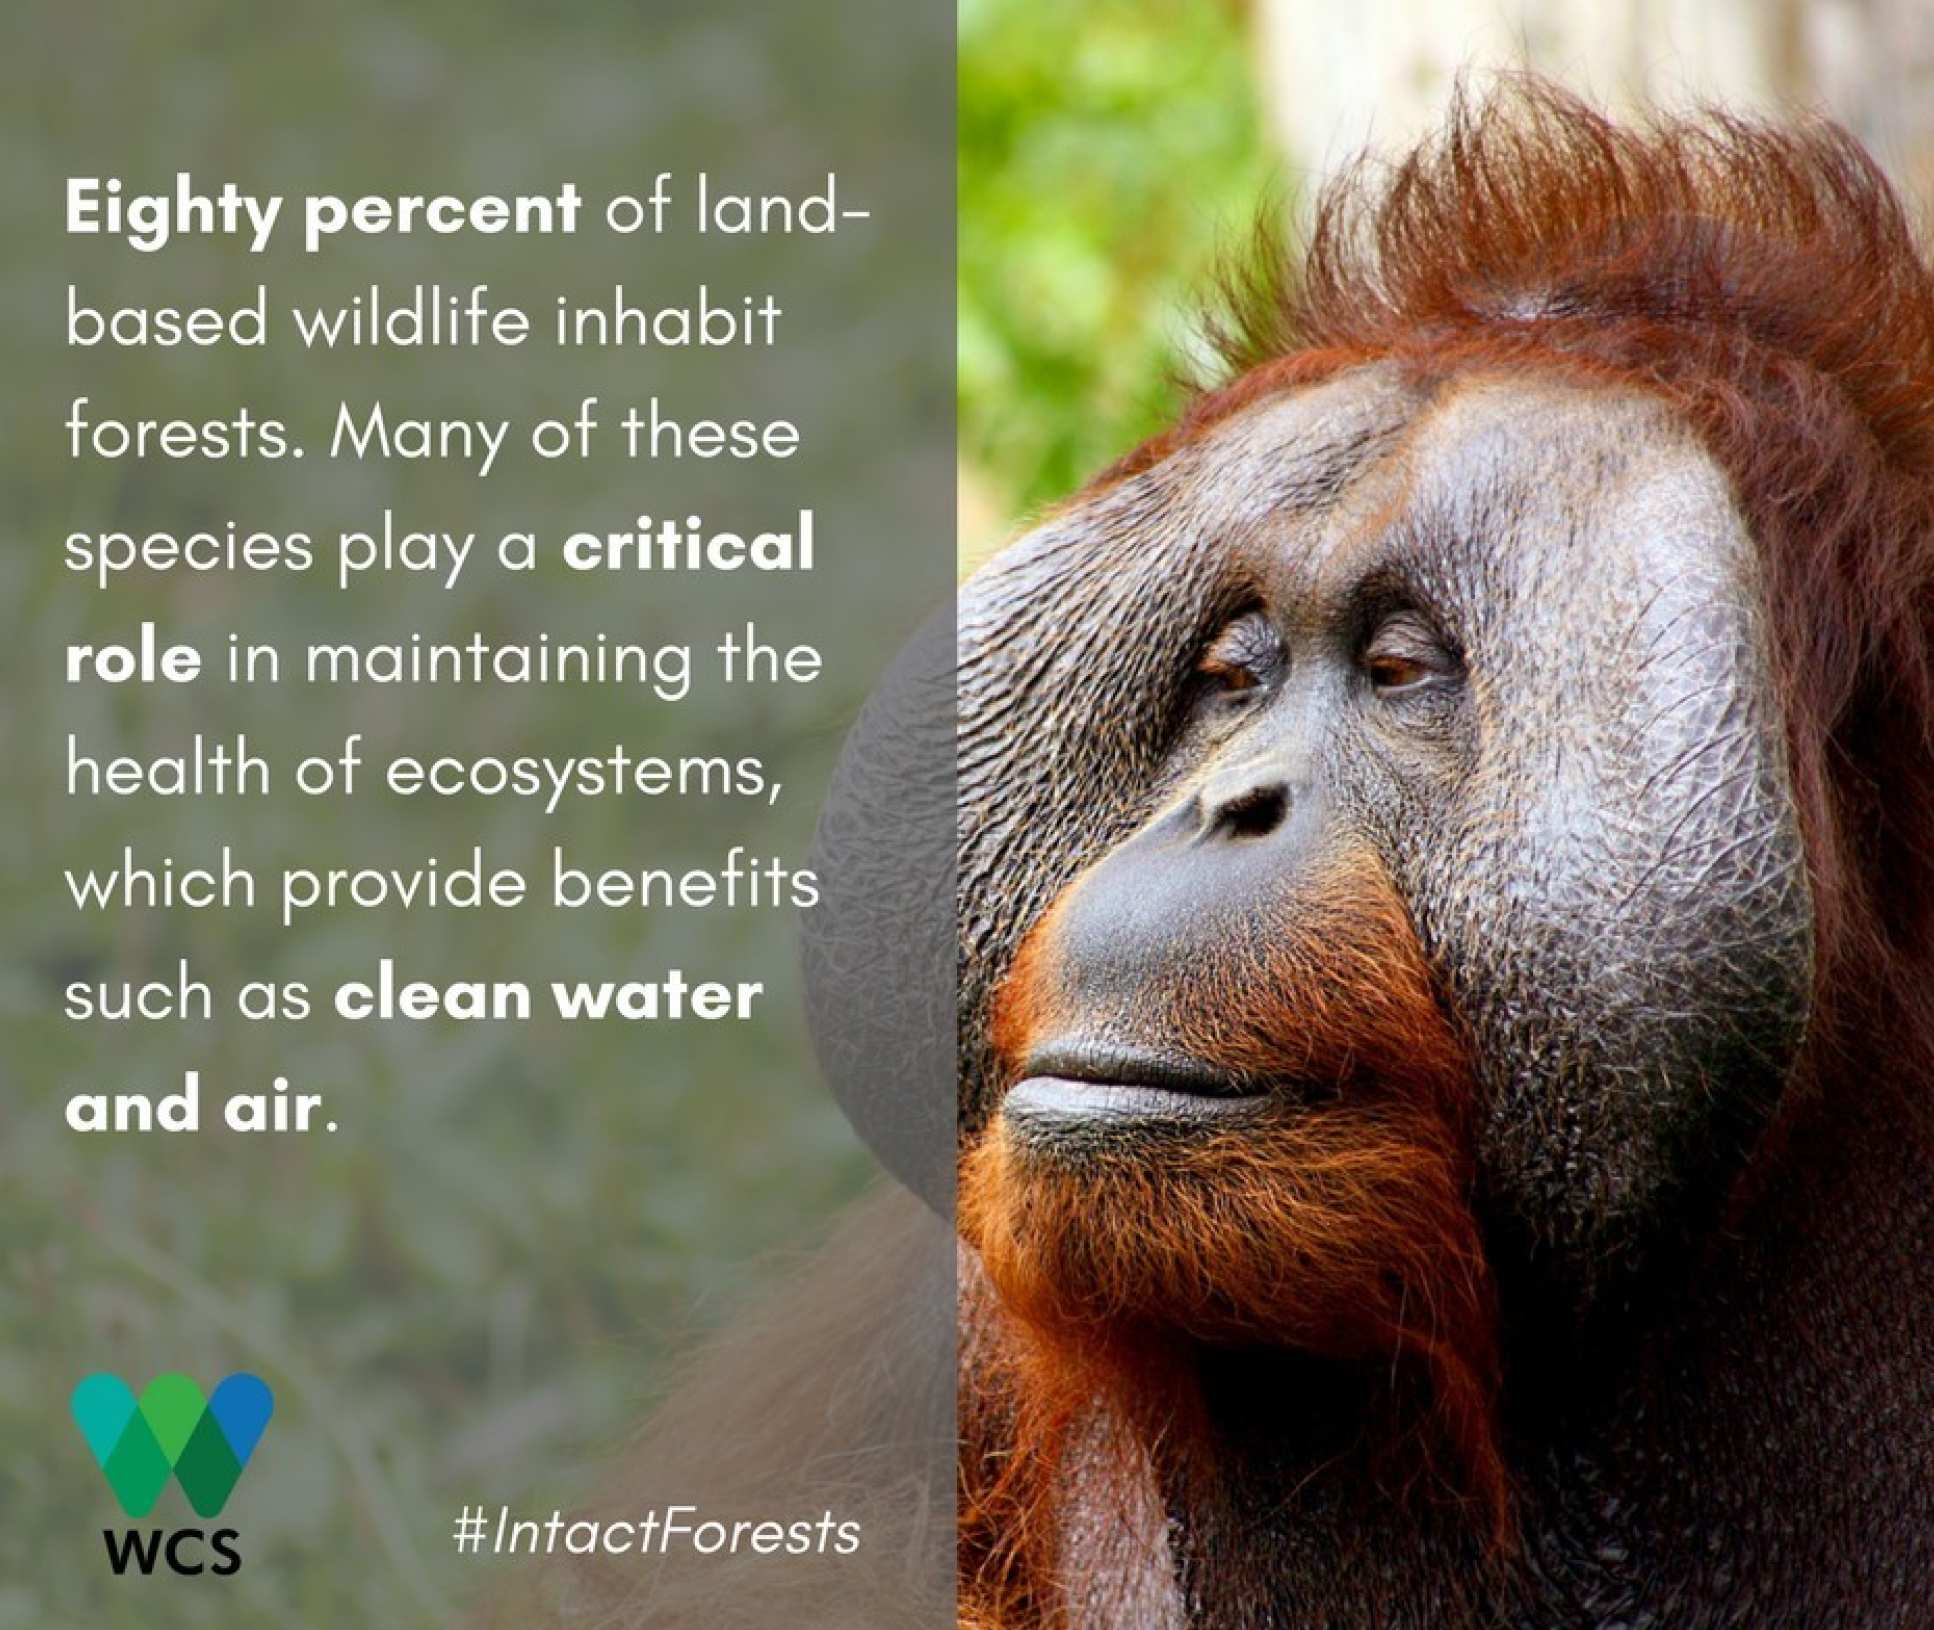 Image of orangutan with caption: Eighty percent of land-based wildlife inhabit forests. Many of these species play a critical role in maintaining the health of ecosystems, which provide benefits such as clean water and air.